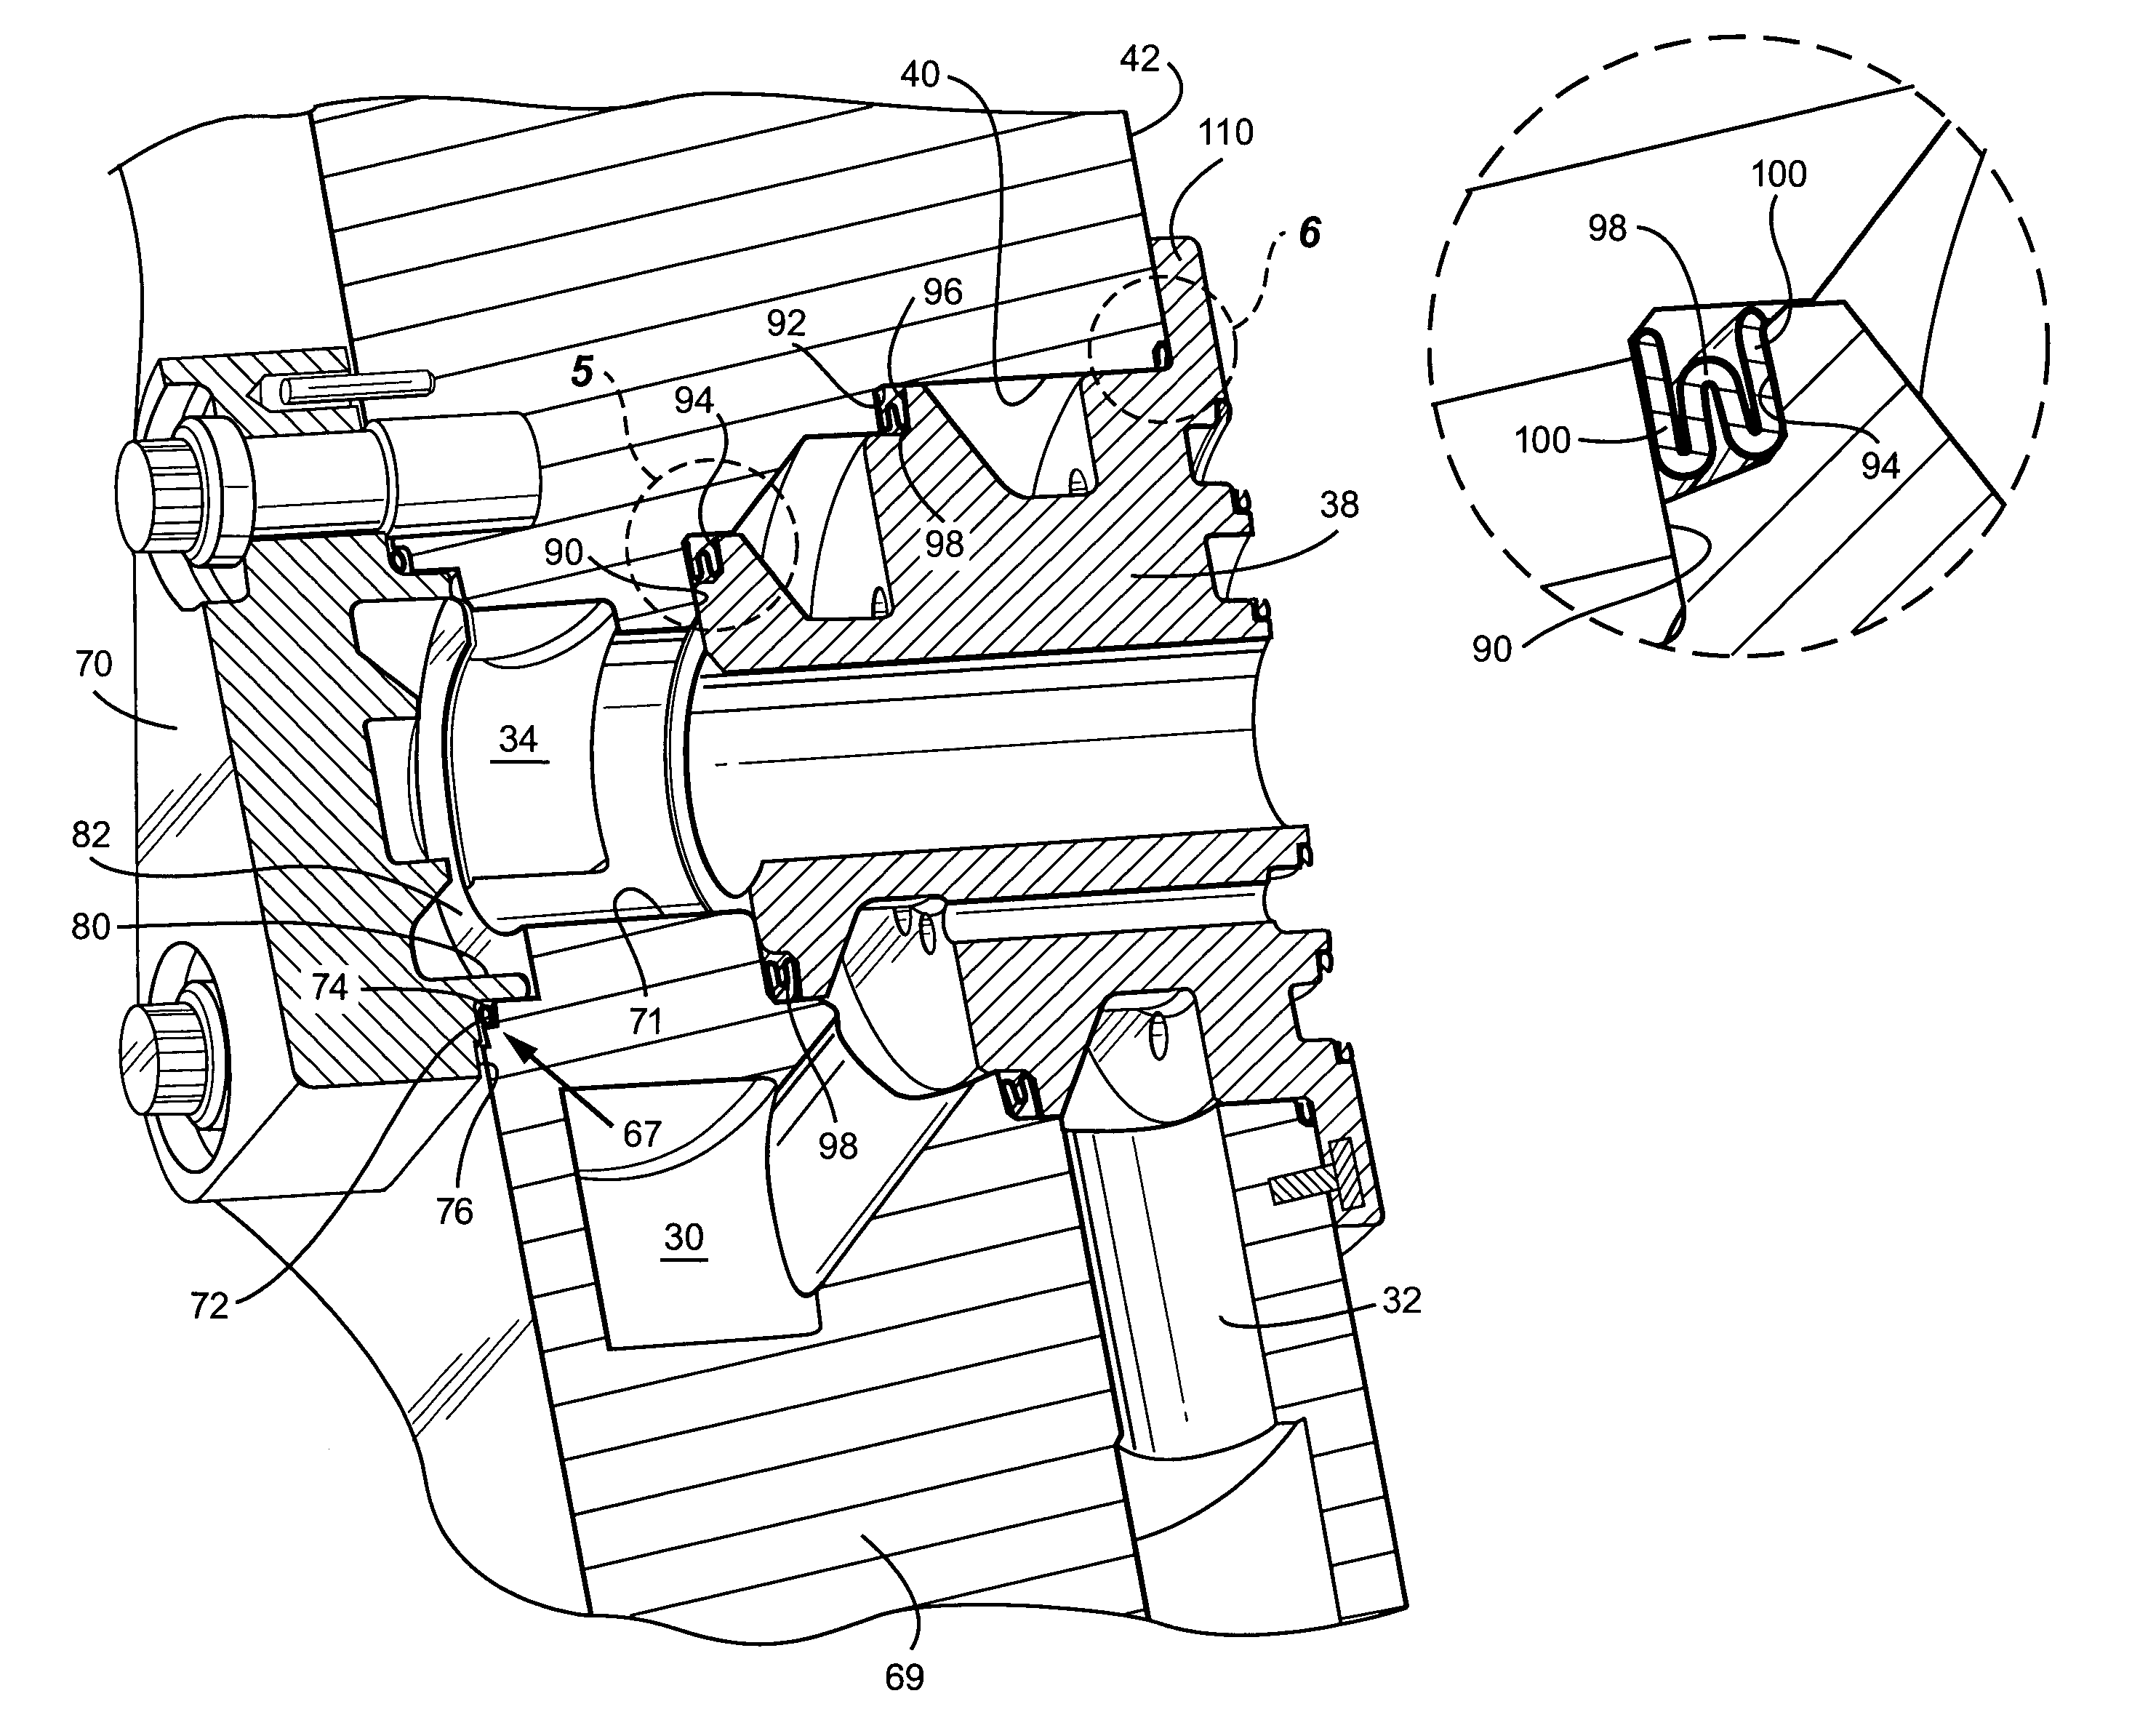 Turbine combustor endcover assembly